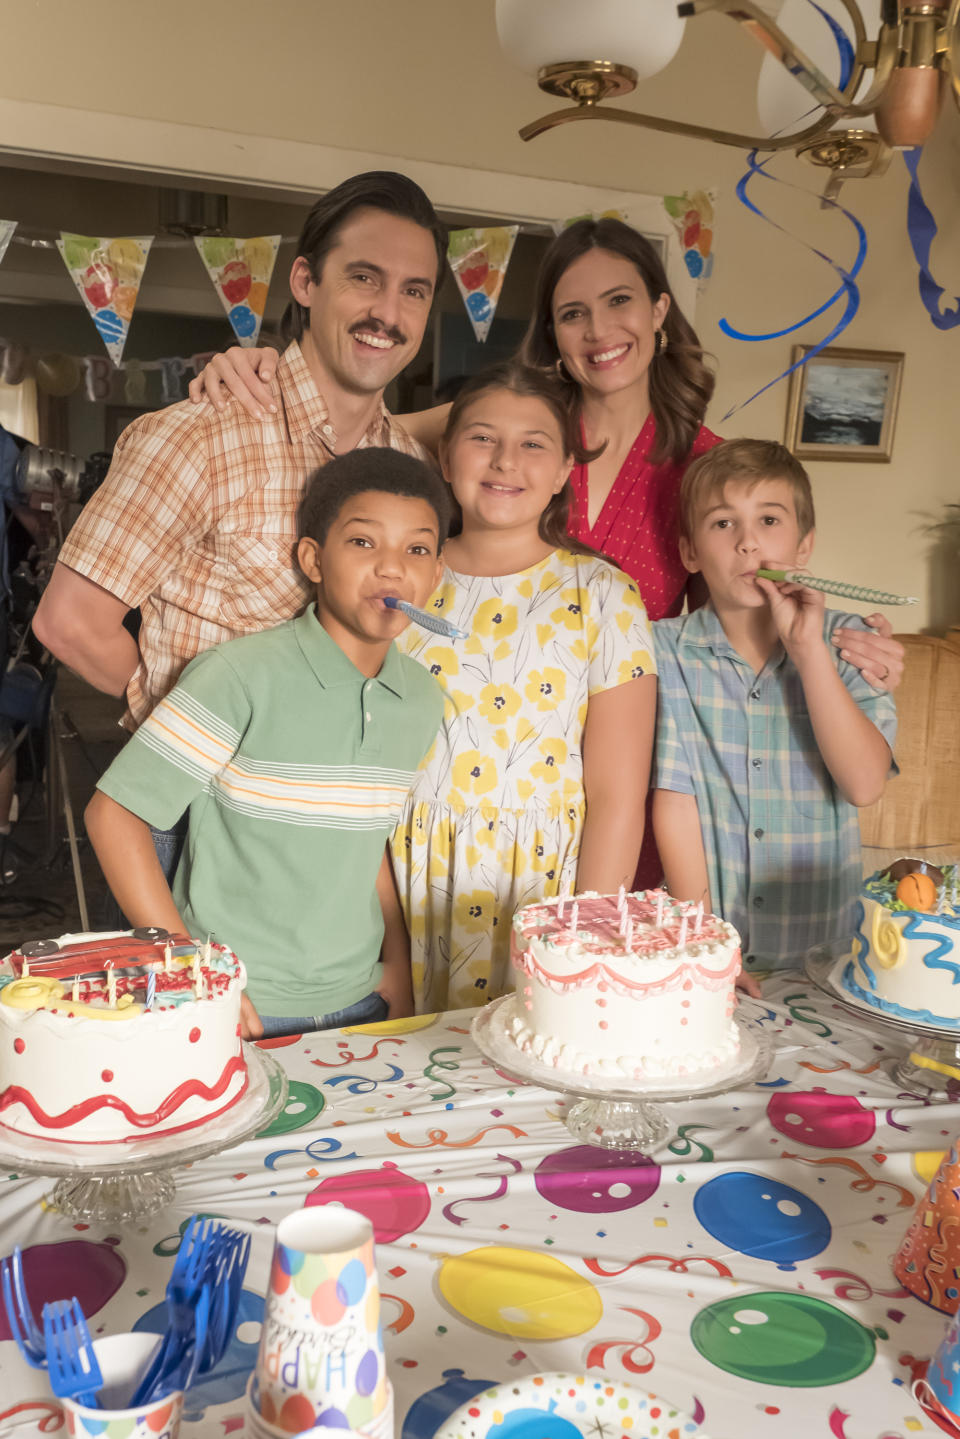 <p>From left: Lonnie Chavis as Randall, Milo Ventimiglia as Jack, Mackenzie Hancsicsak as Kate, Mandy Moore as Rebecca, and Parker Bates as Kevin in NBC’s <i>This Is Us</i>.<br> (Photo: Ron Batzdorff/NBC) </p>